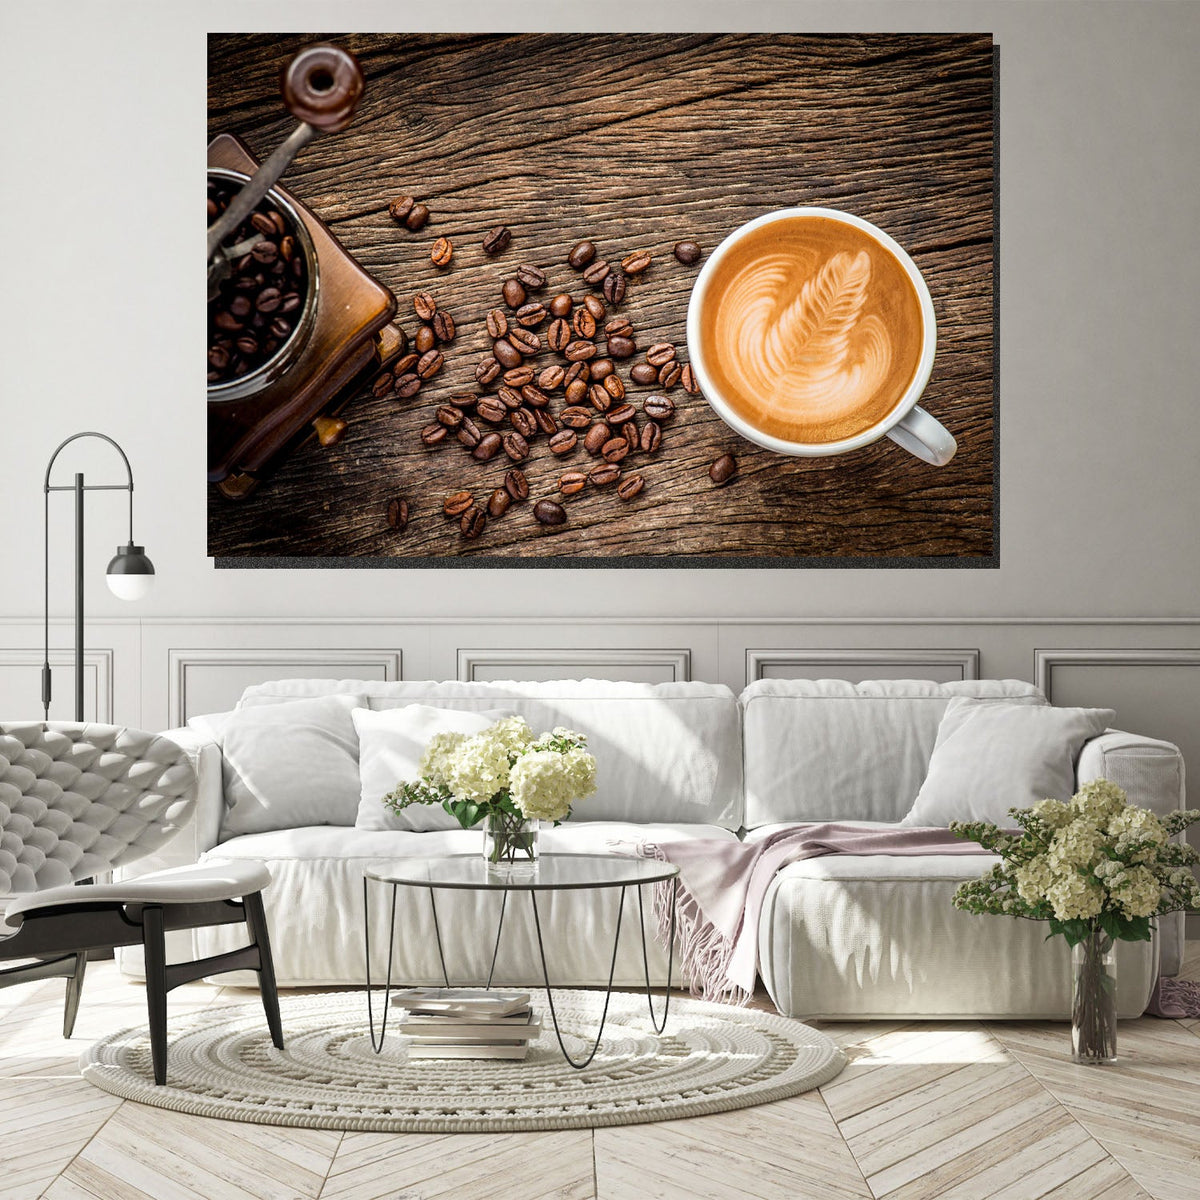 https://cdn.shopify.com/s/files/1/0387/9986/8044/products/CoffeeDecadenceCanvasArtprintStretched-4.jpg